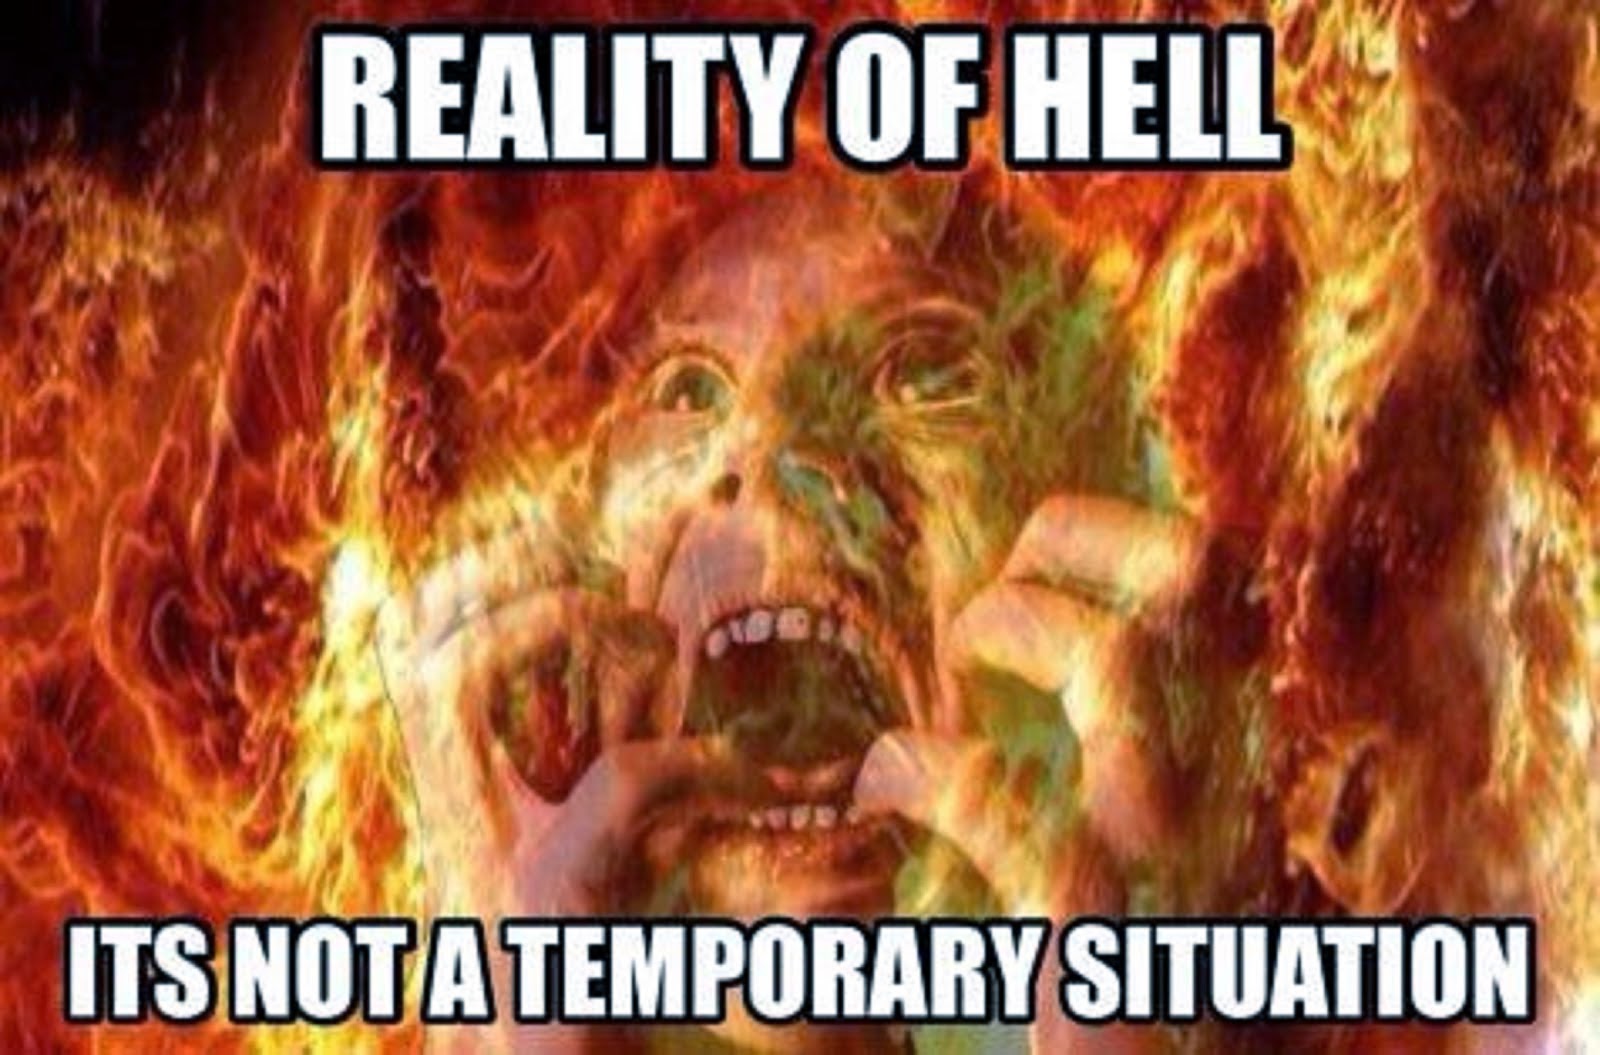 9. THE REALITY OF HELL IS NOT A TEMPORARY SITUATION